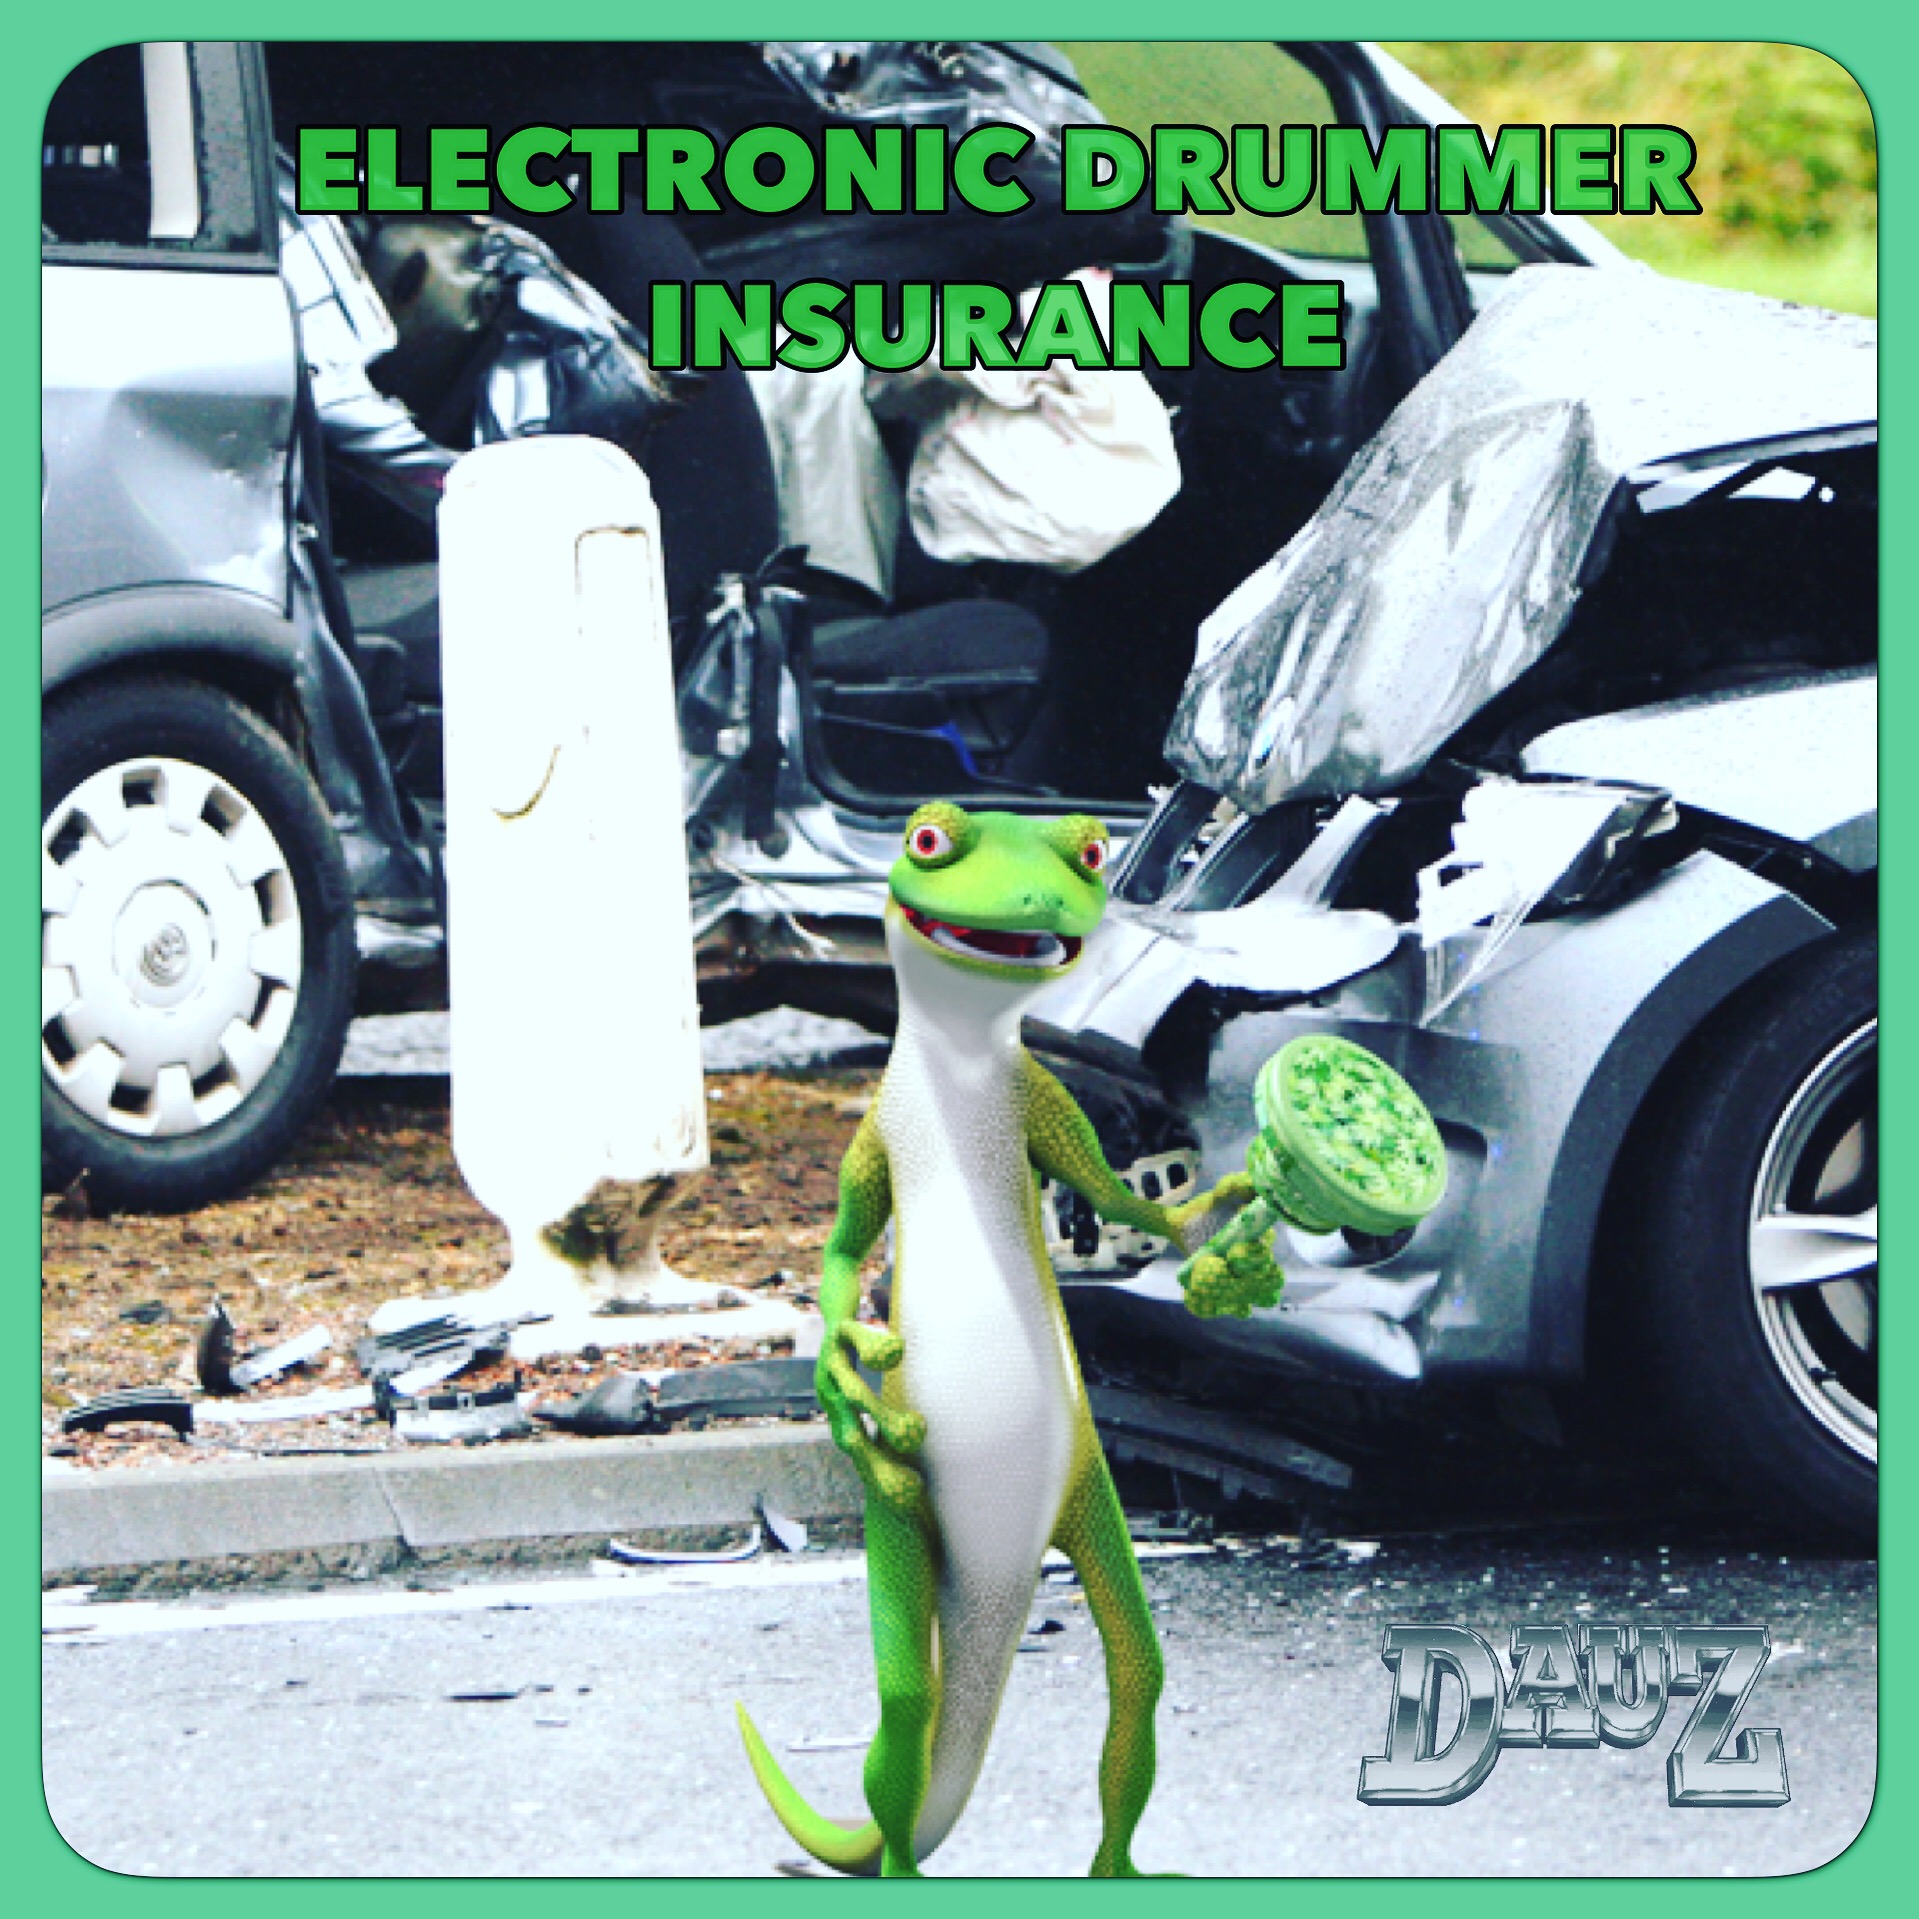 Electronic Drummer Insurance